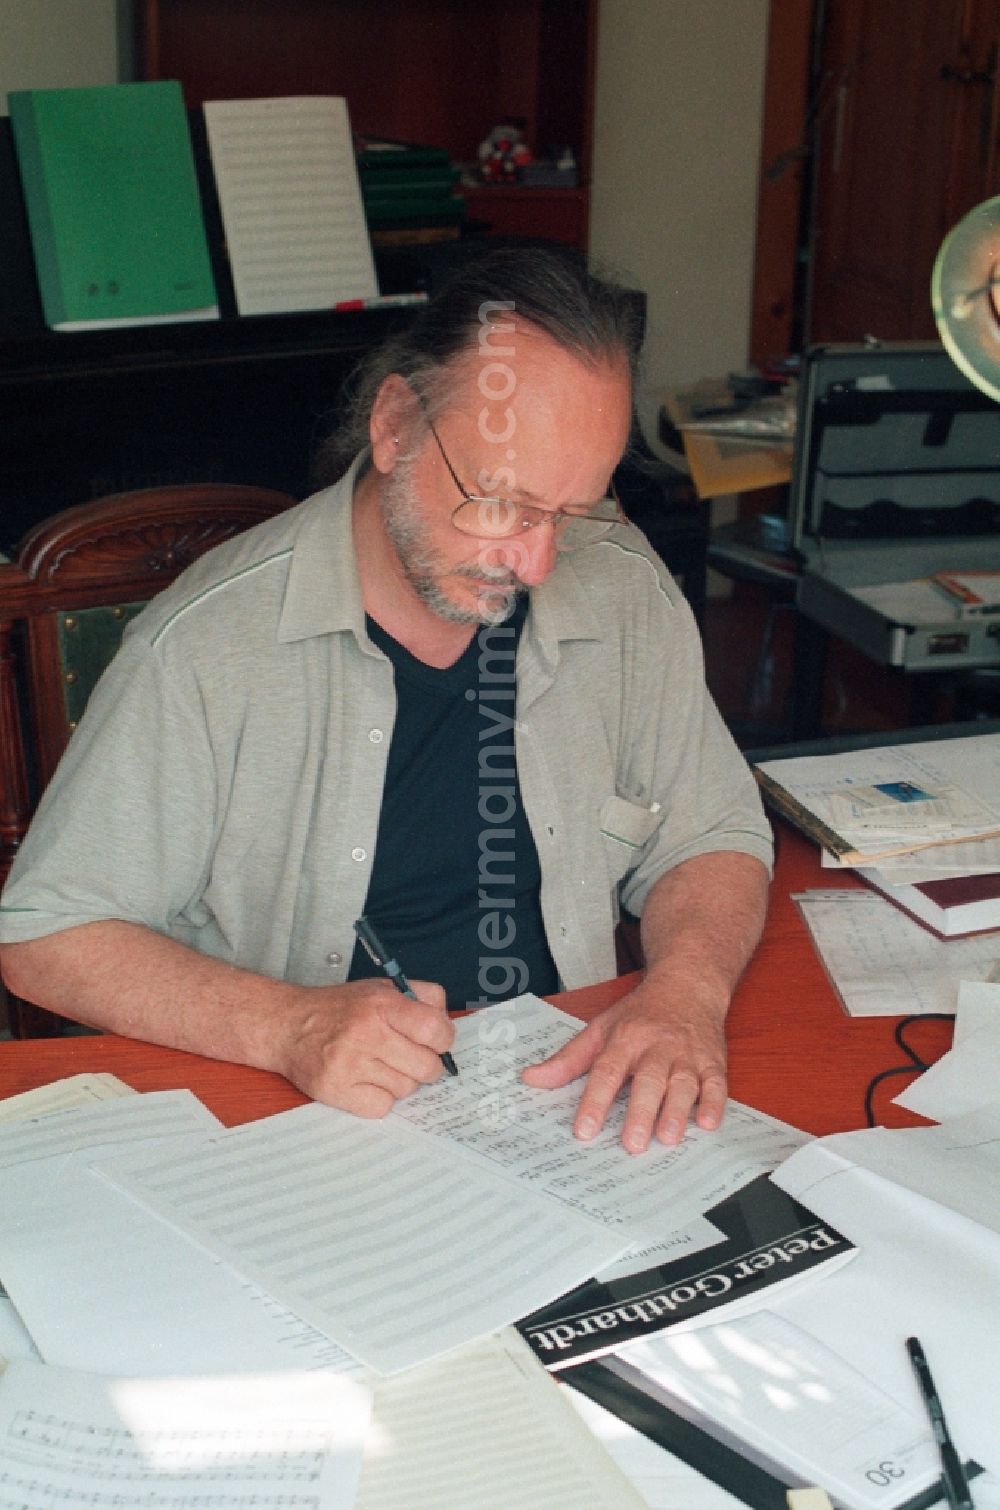 GDR picture archive: Berlin - Peter Gotthardt German composer, musician and publisher in Berlin. He composed more than 50